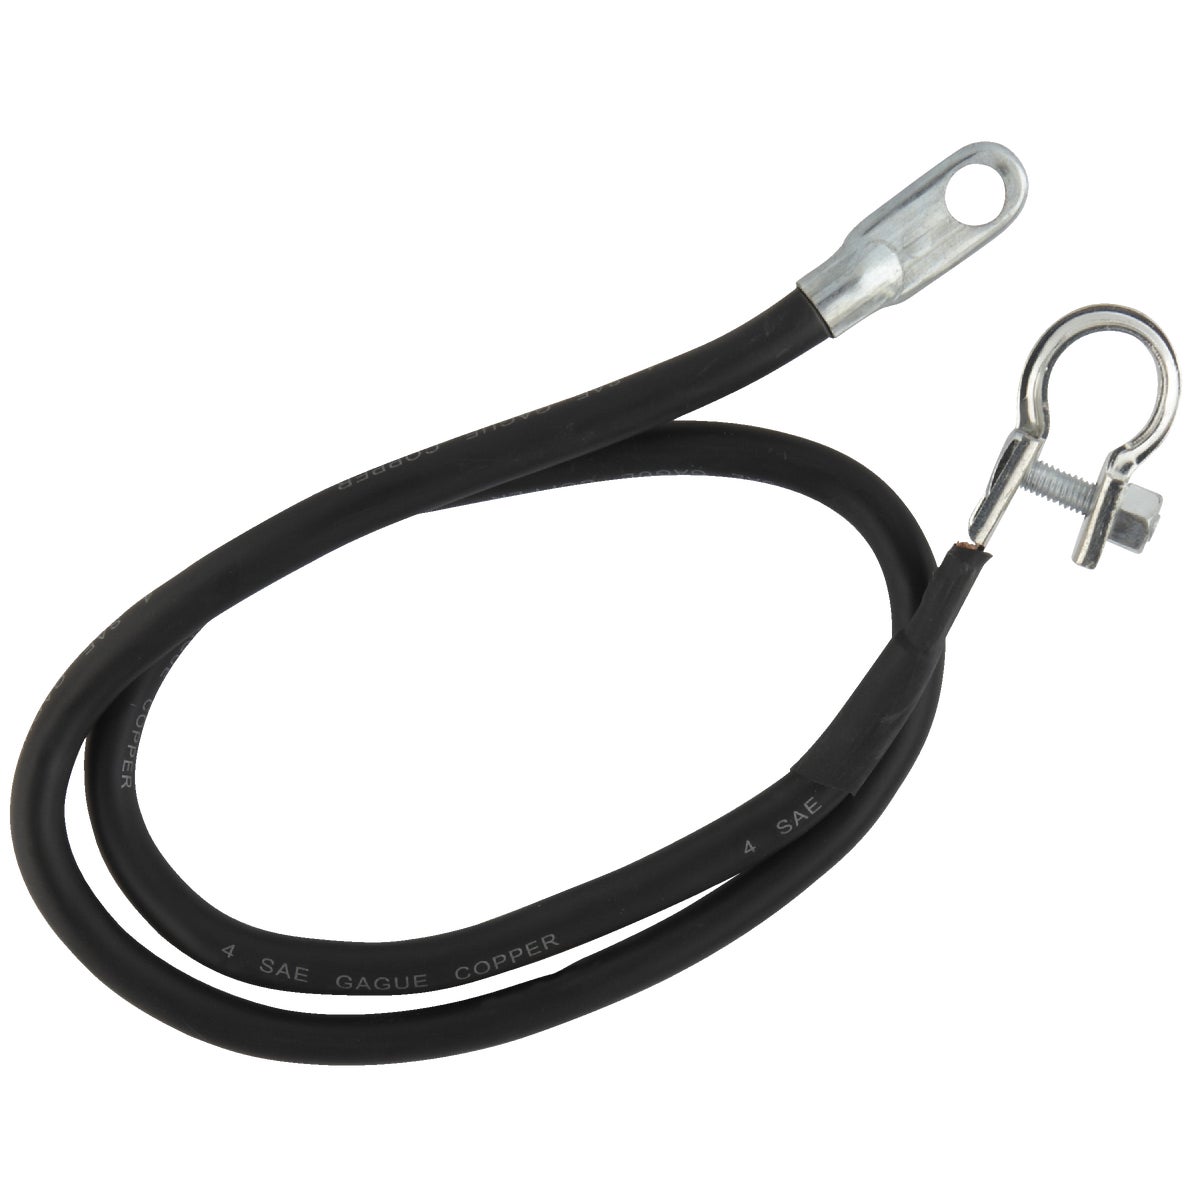  Road Power 31 In. 4 Gauge Top Post Battery Cable